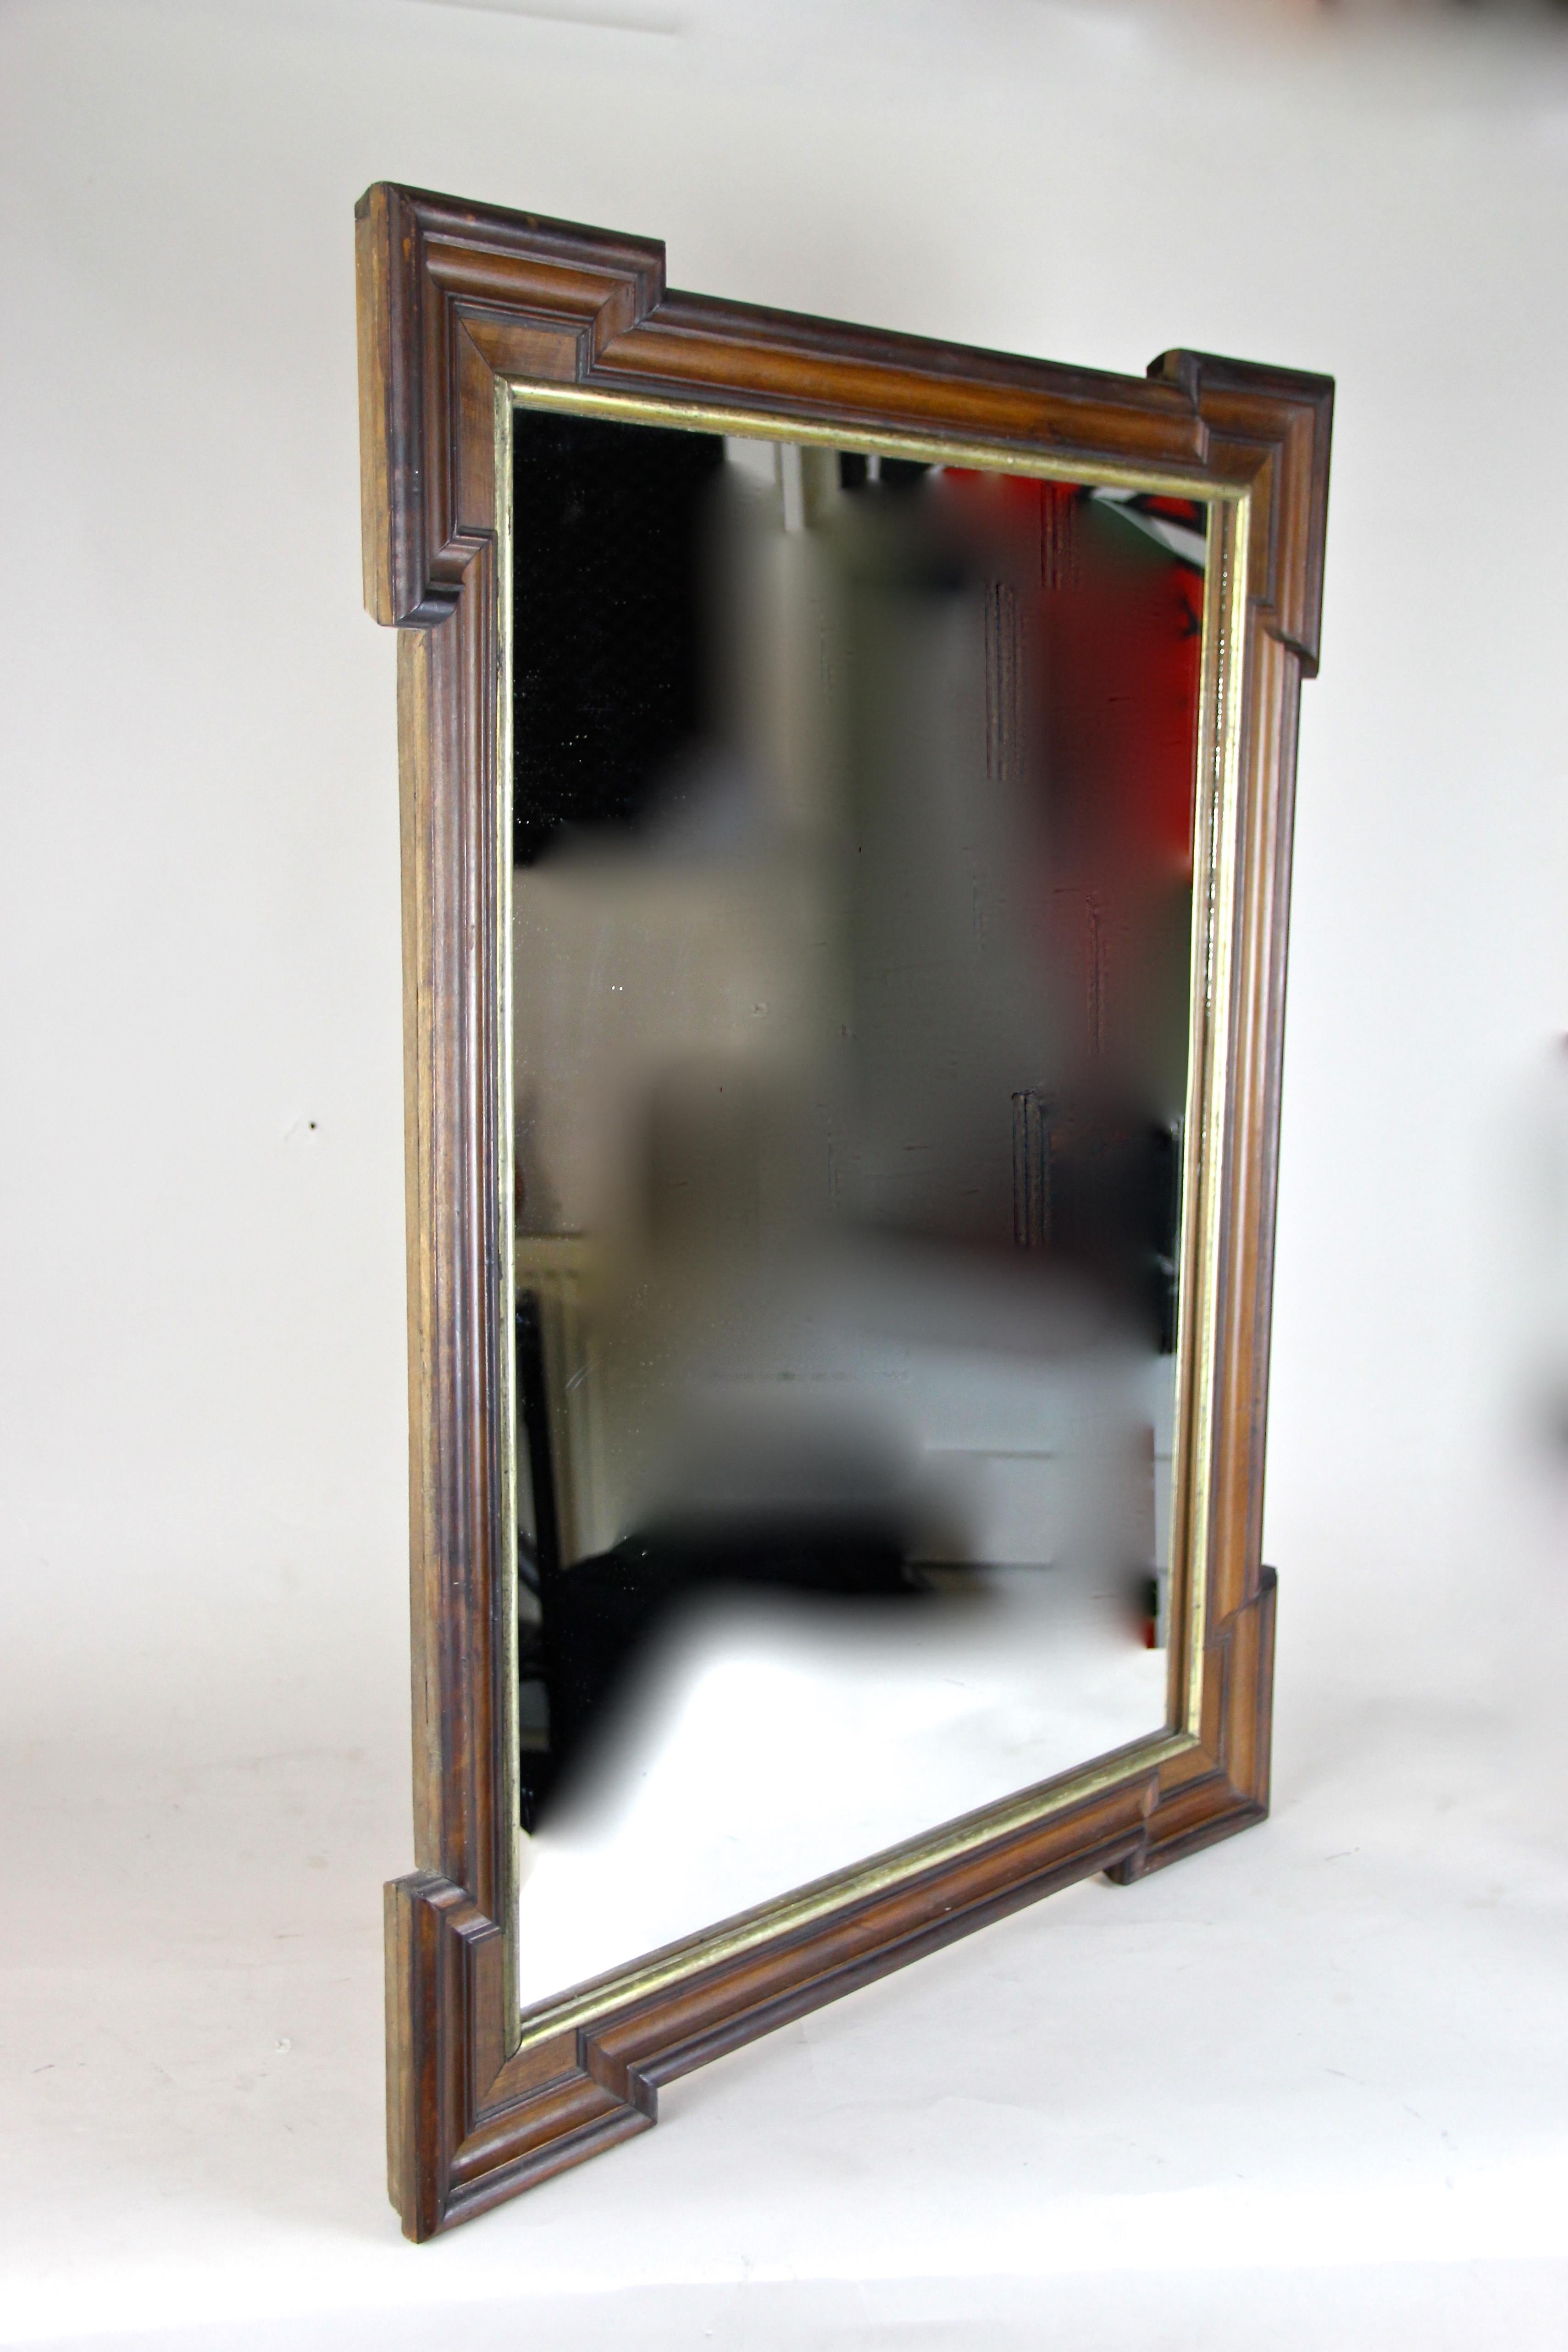 Made in beautiful Austria around 130 years ago, this large nut wood wall mirror shows an overlapping inserted substructure of spruce wood. The beautiful frame shows a unique design with different composed nut wood veneered bars. Elegant lines and